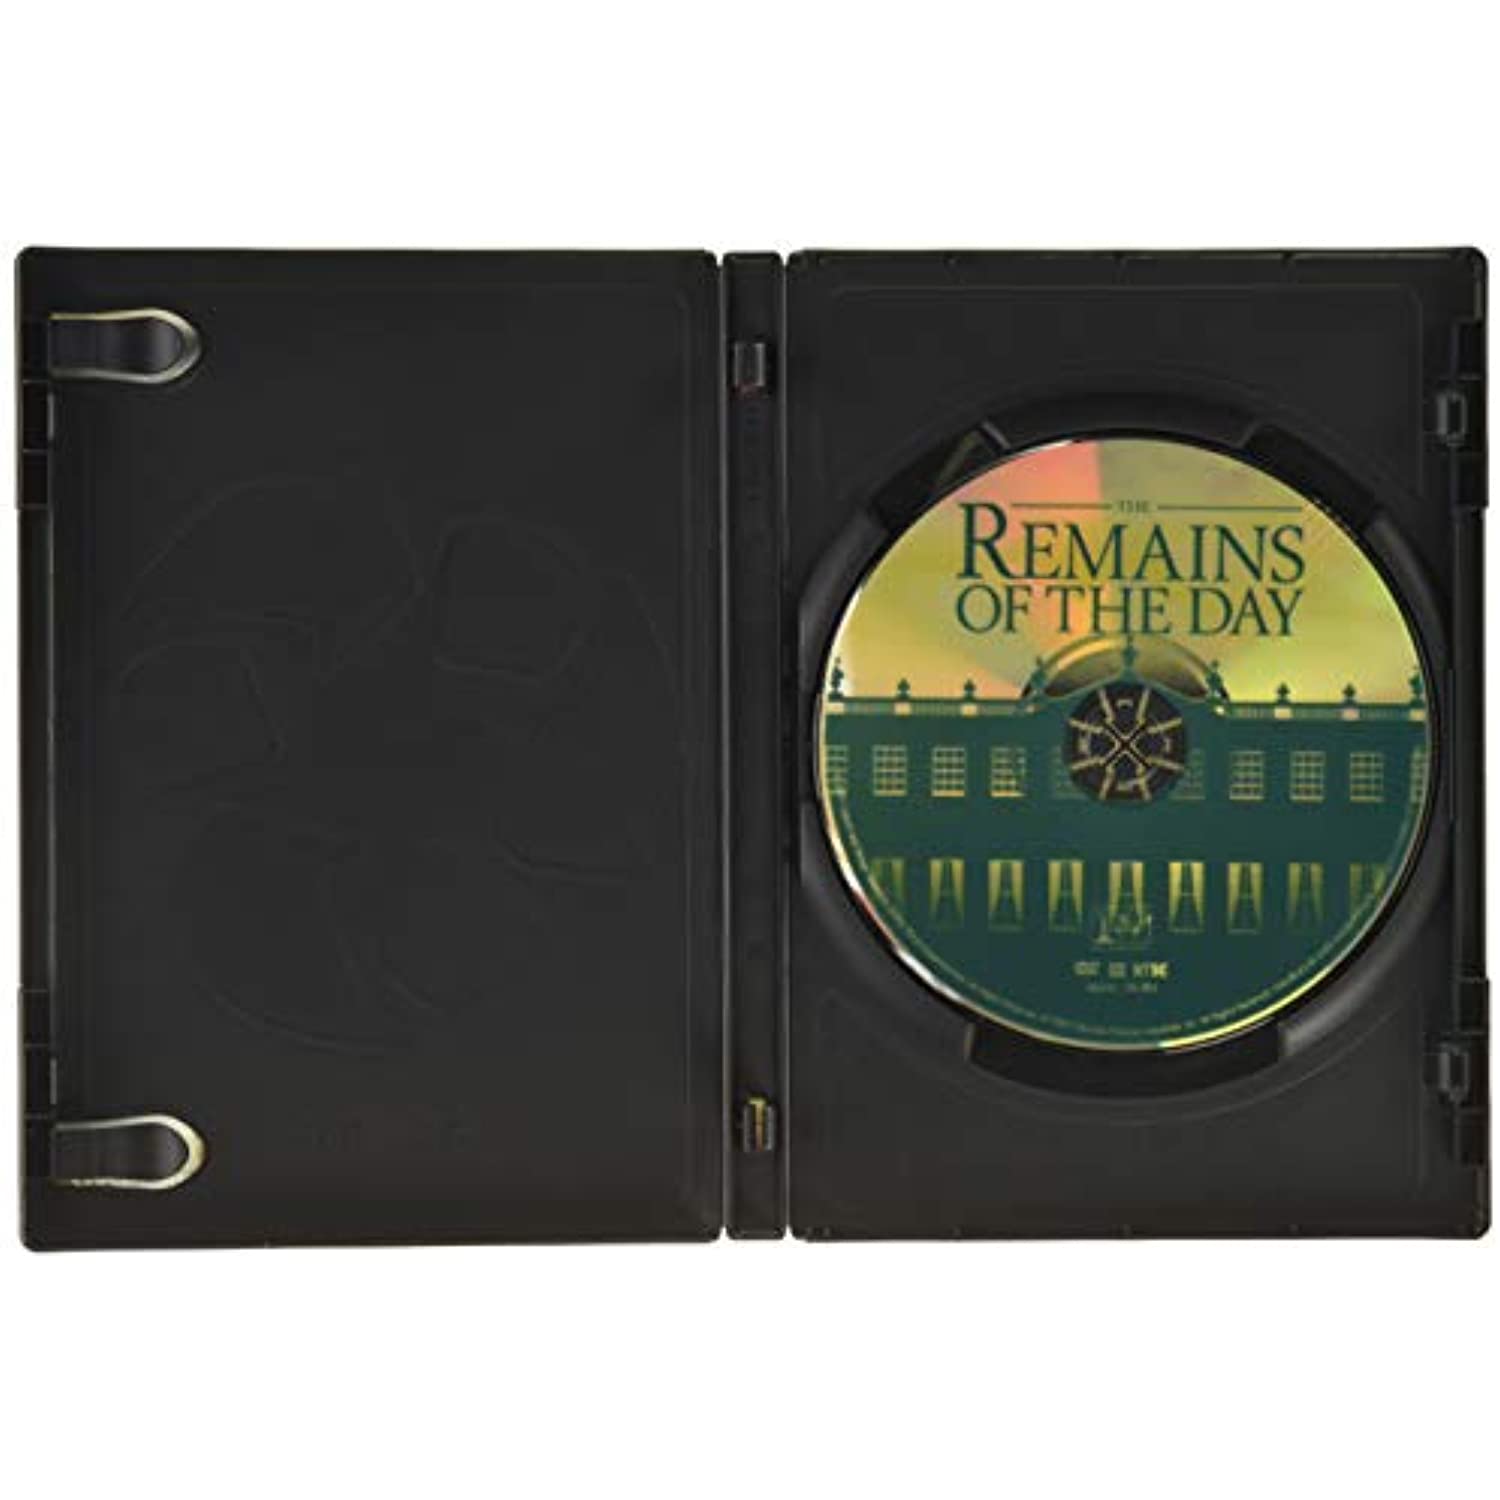 The Remains of the Day (DVD), Sony Pictures, Drama - image 3 of 3